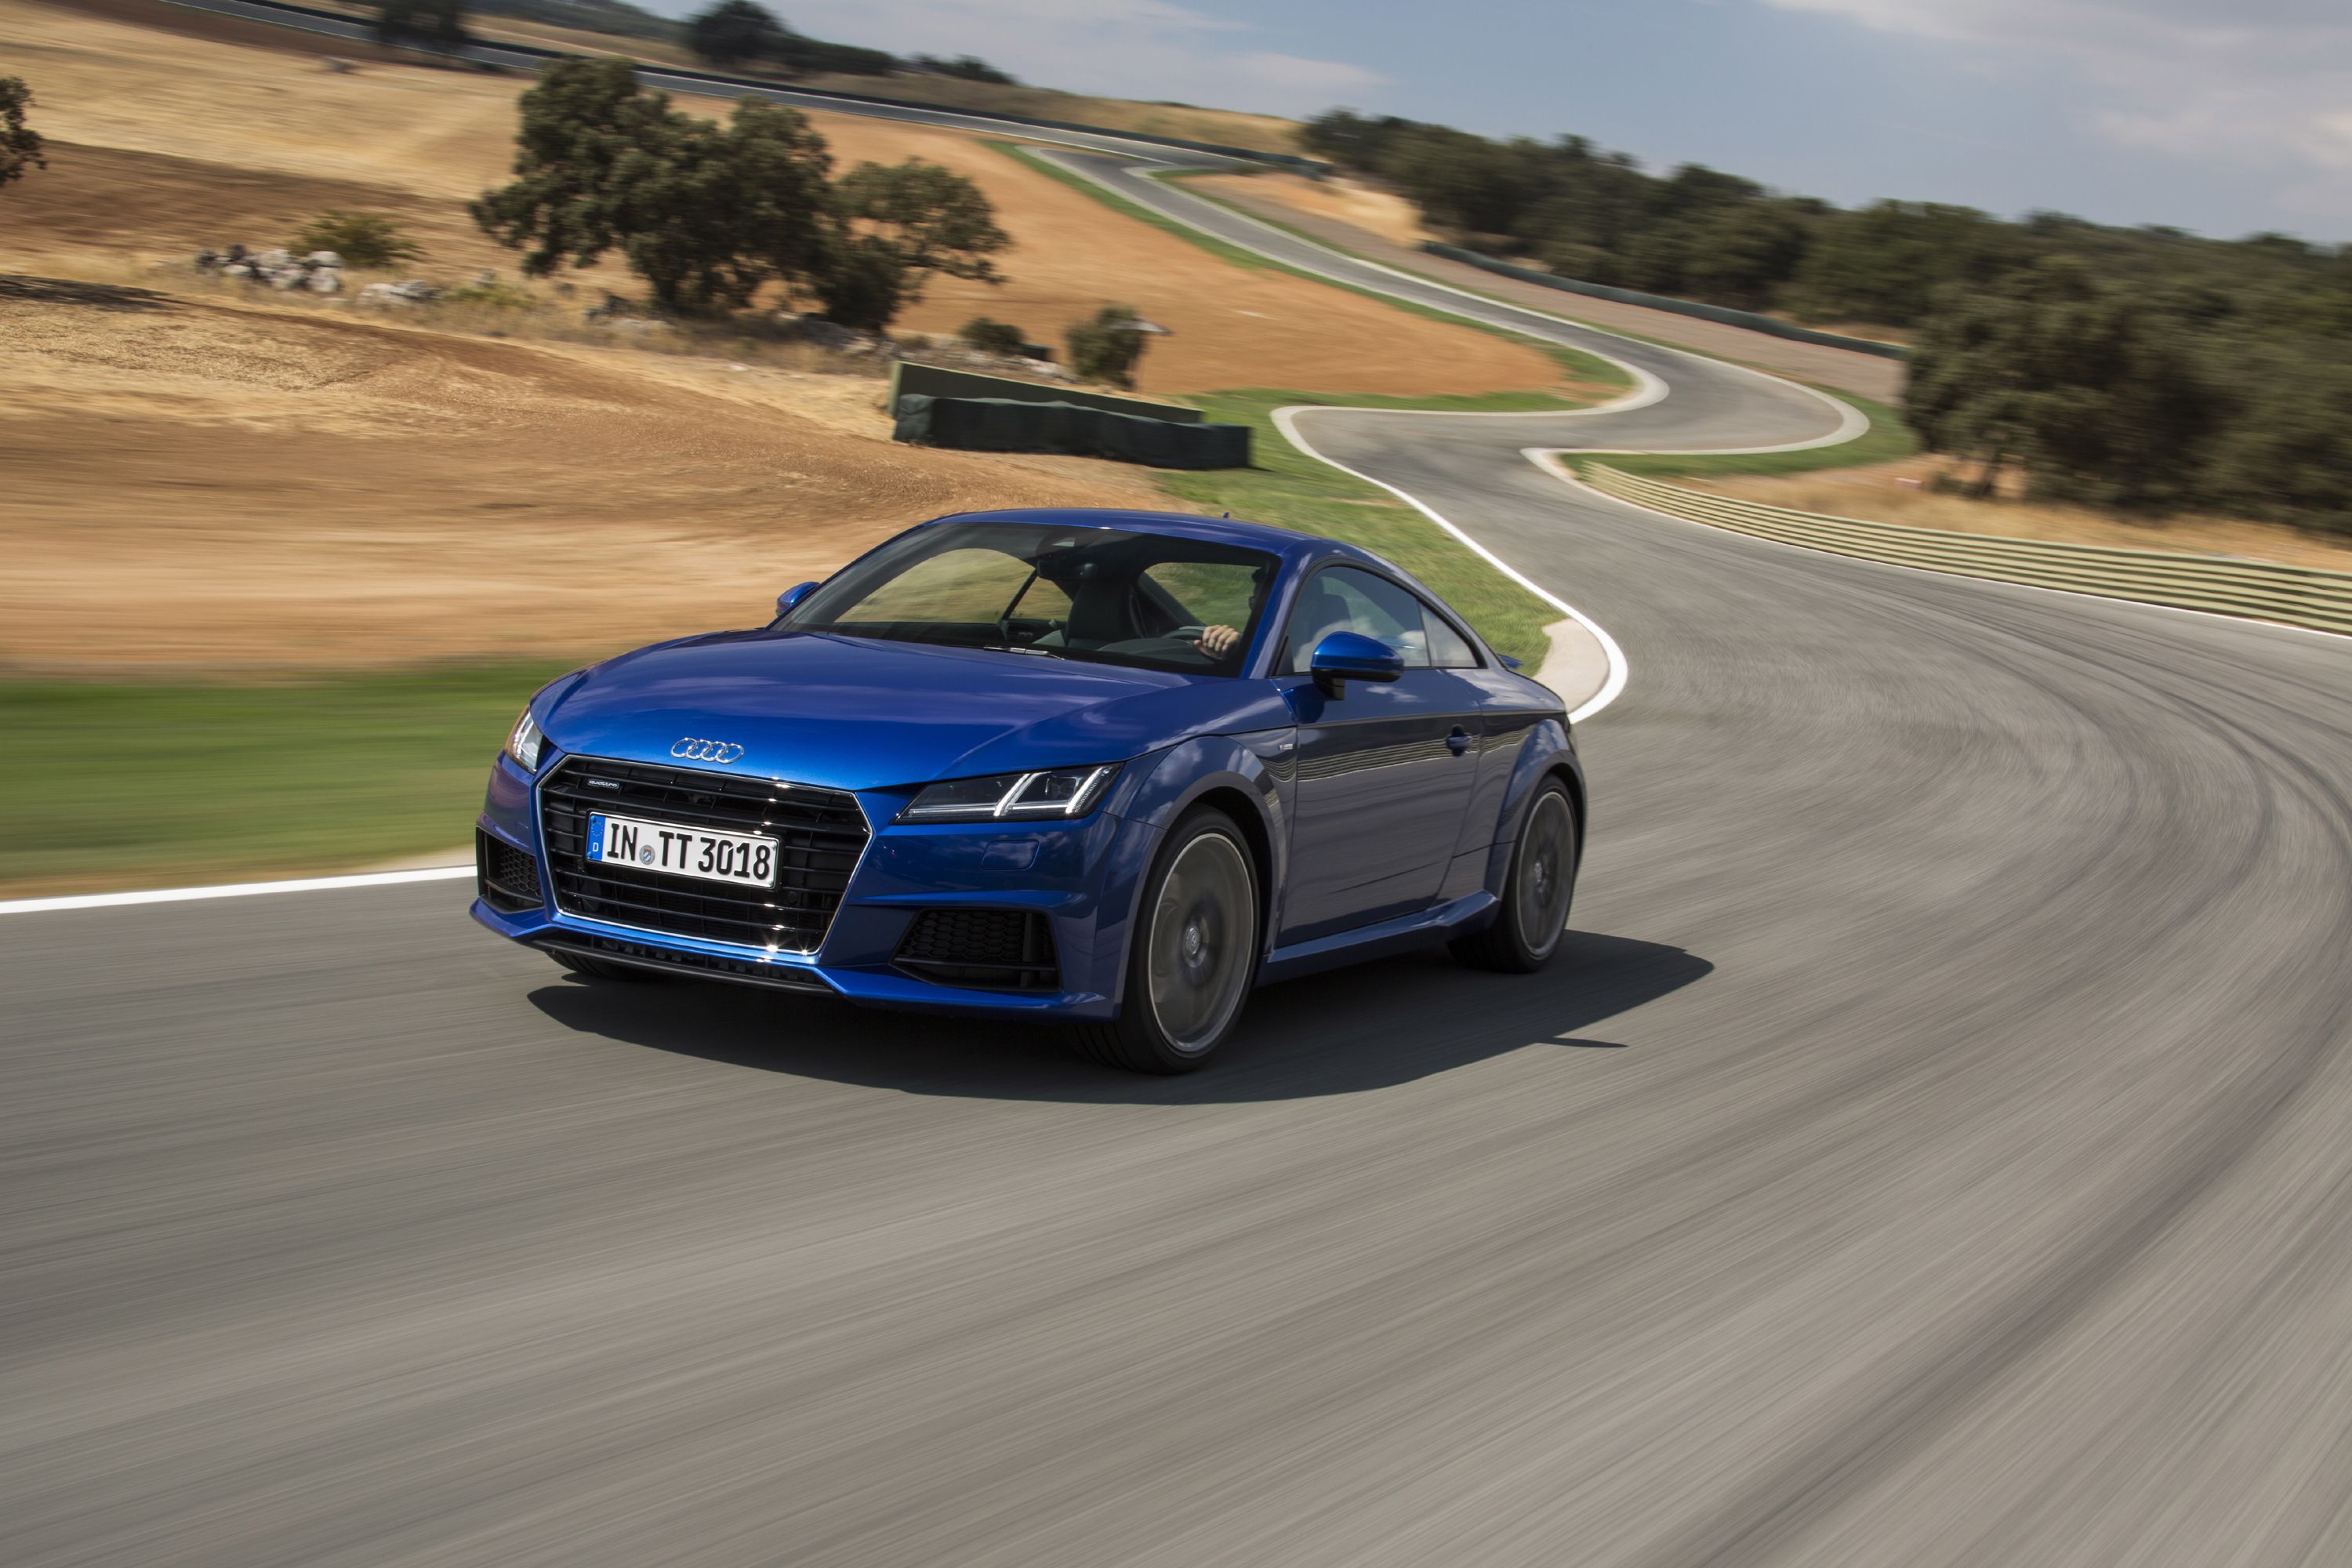 2016 Audi TT and TTS first drive review